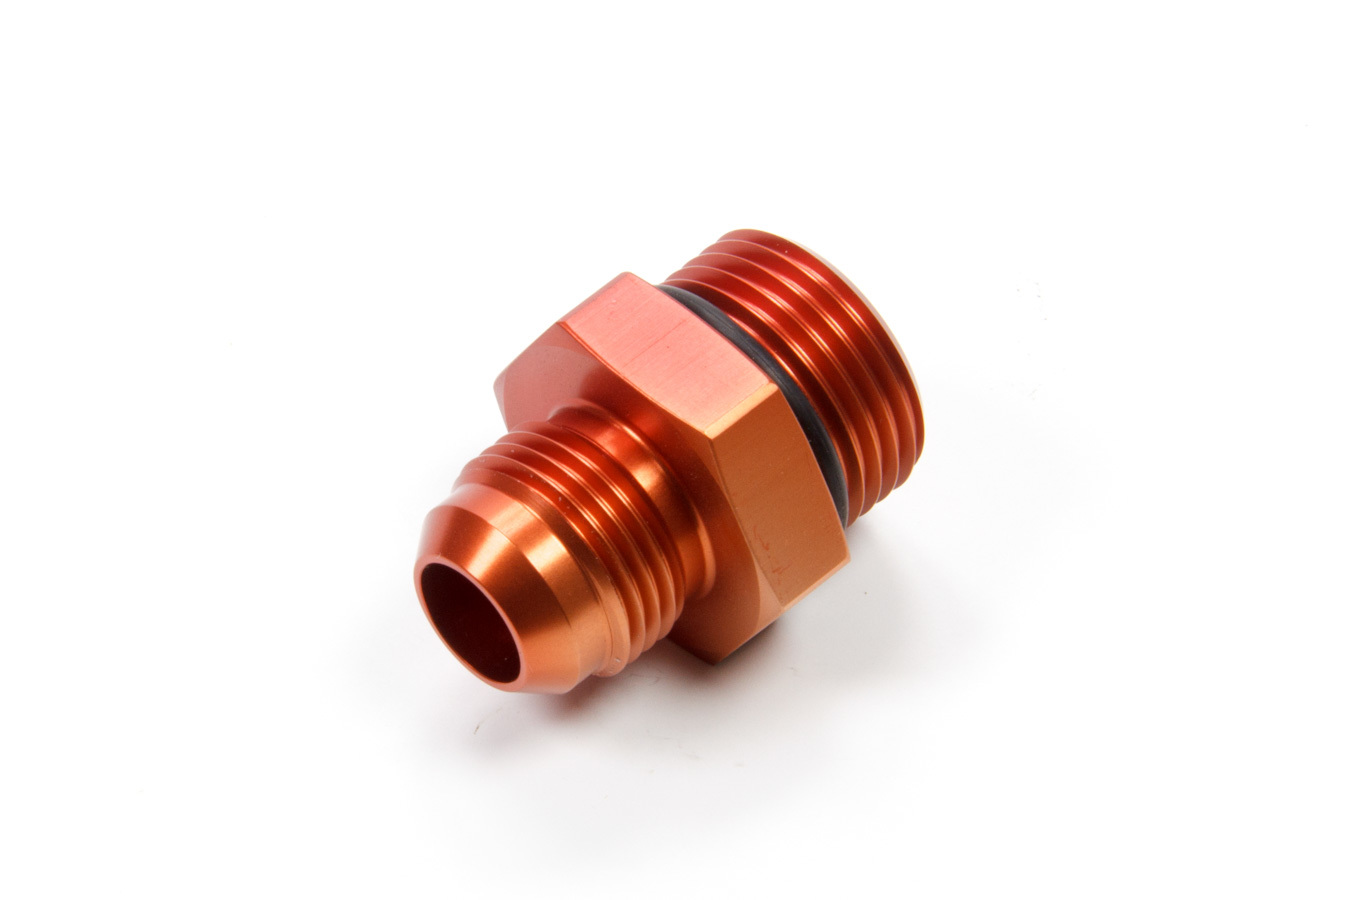 Stock Car Products 1210-10 Fitting, Adapter, Straight, 12 AN Male to 10 An Male, Aluminum, Red Anodized, Each